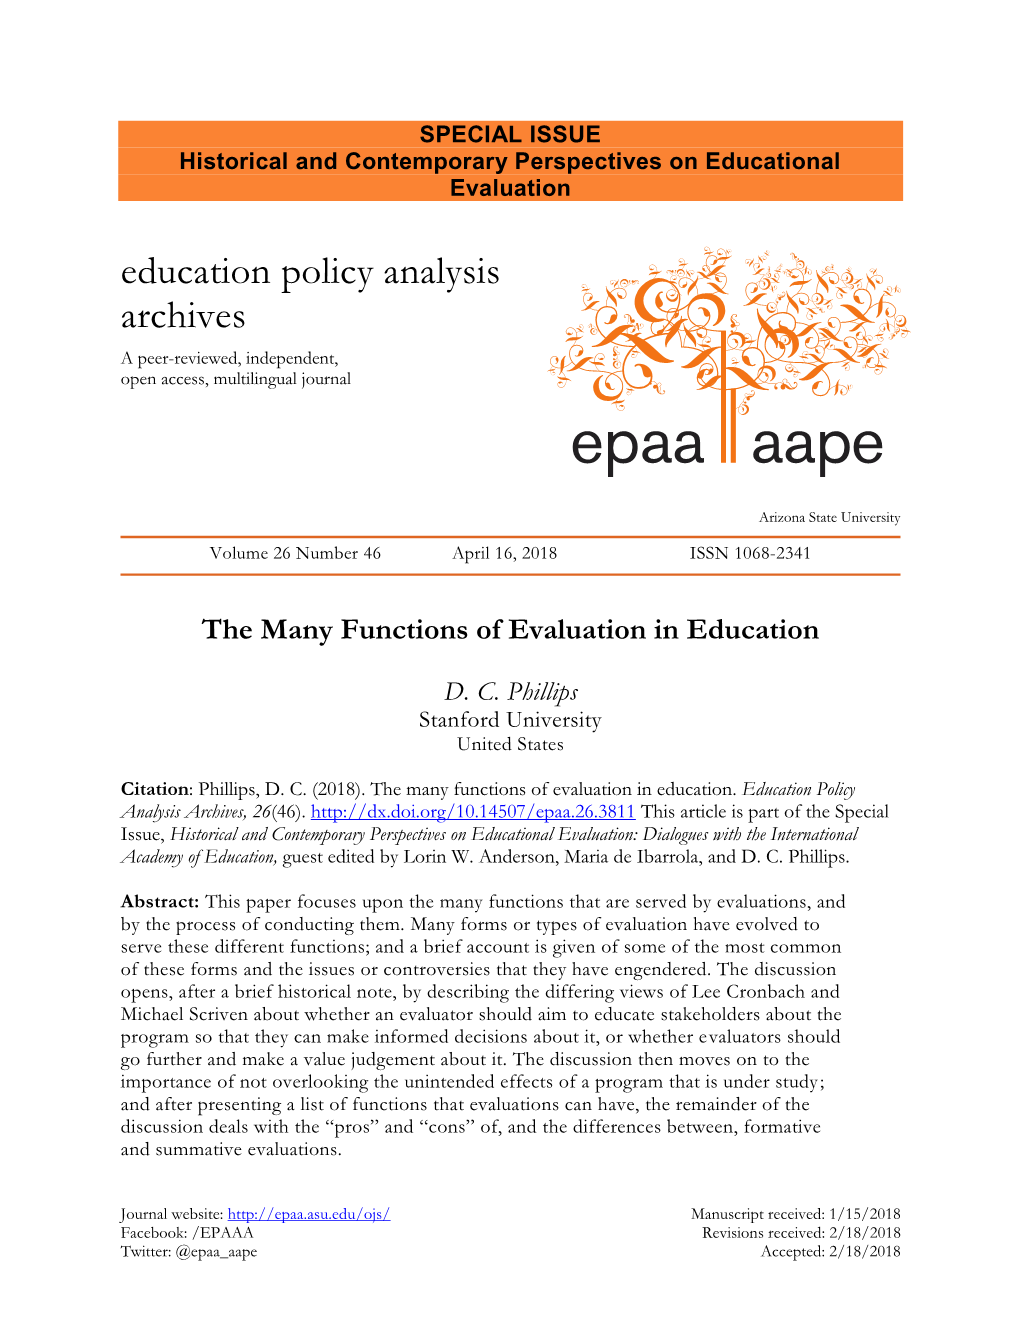 The Many Functions of Evaluation in Education. Education Policy Analysis Archives, 26(46)